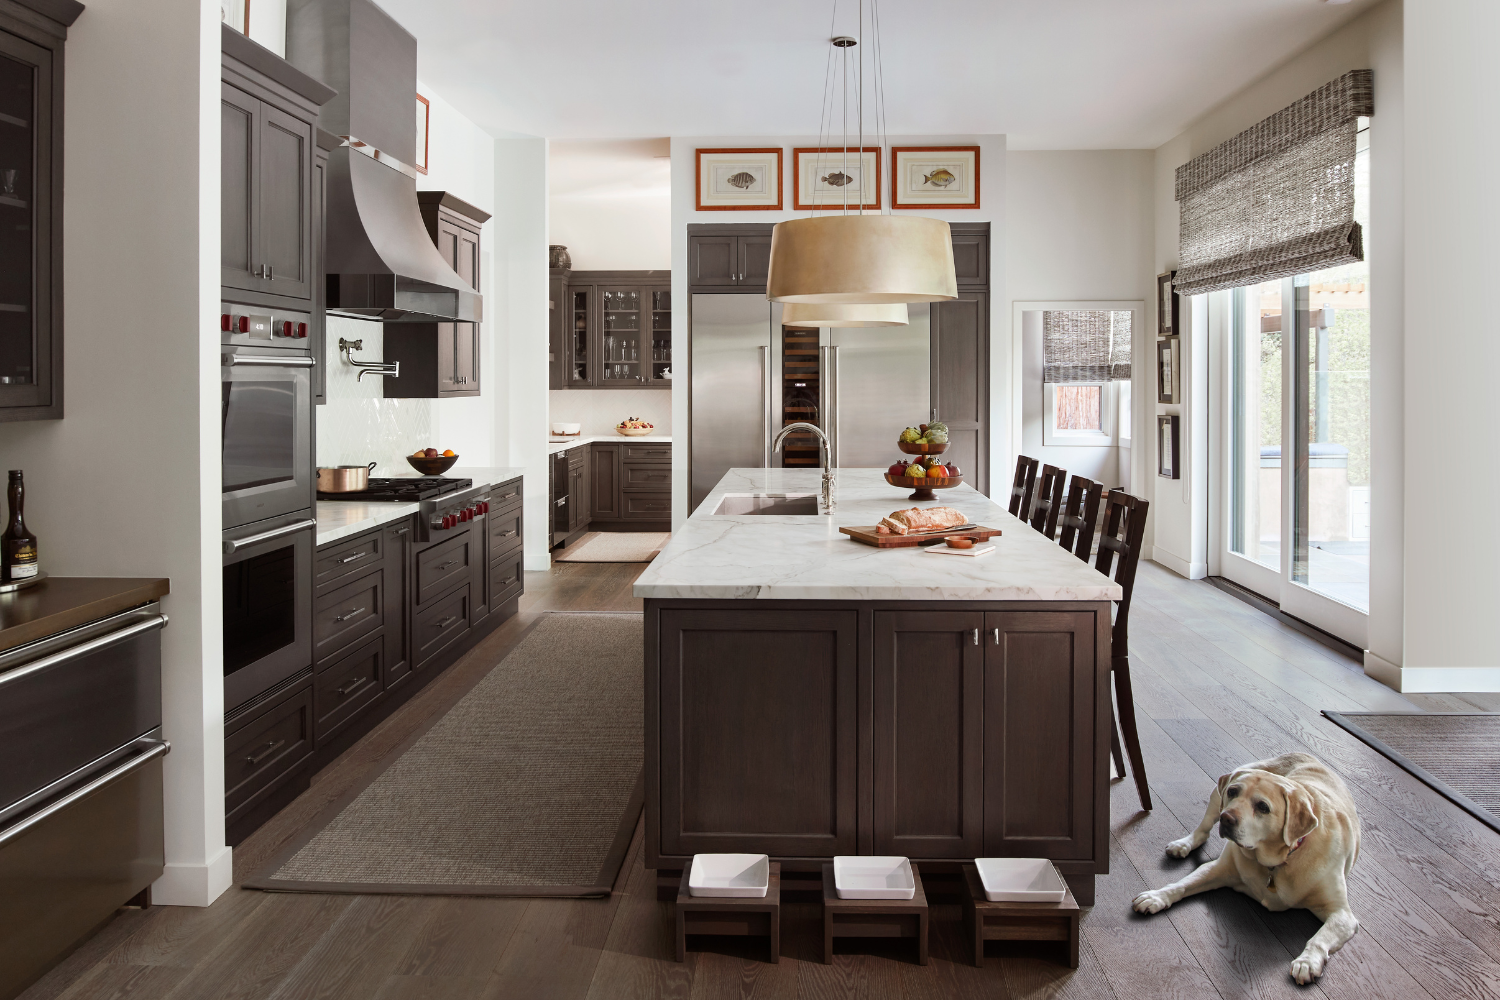 douglah-designs-moraga-ca-designers-year-in-review-chefs-kitchen-with-dog-resting-near-by